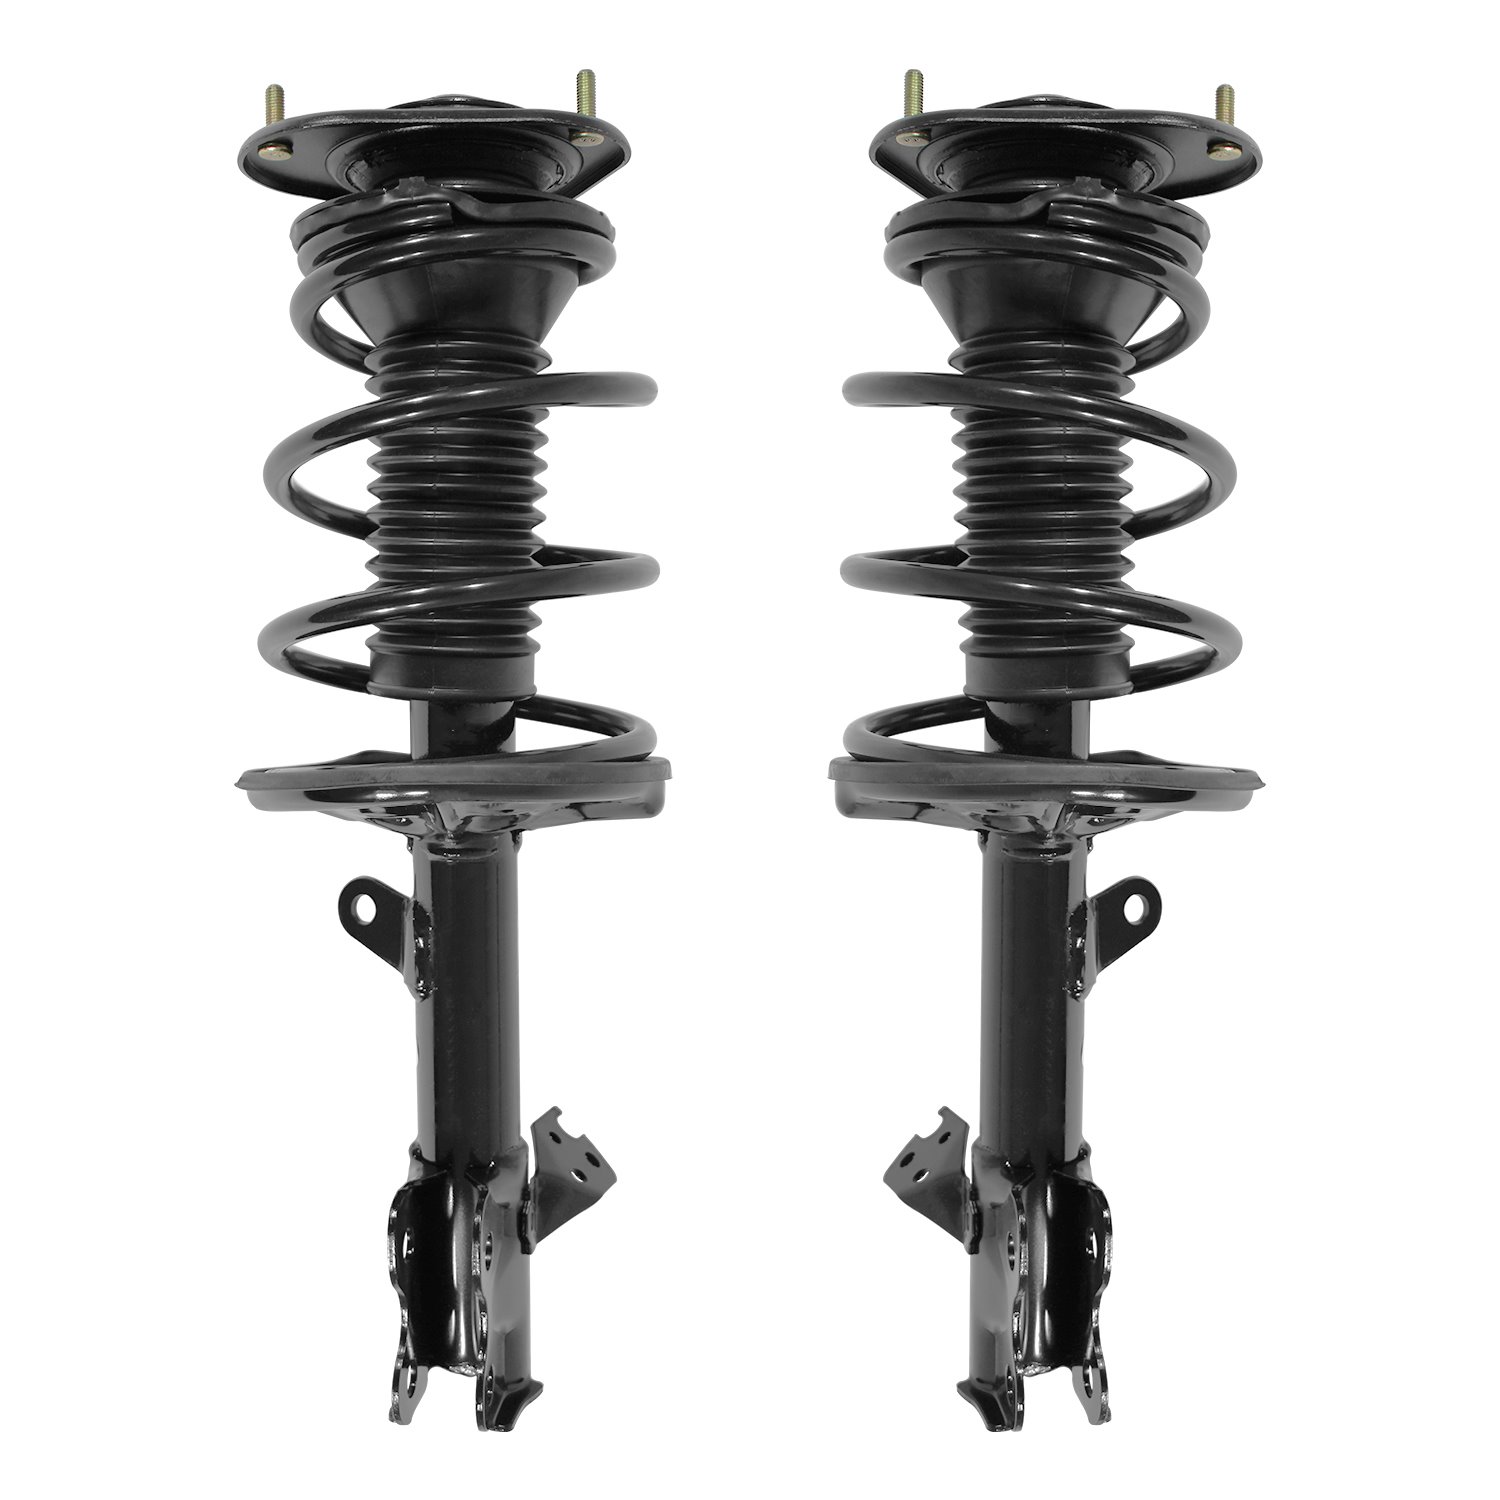 2-11963-11964-001 Suspension Strut & Coil Spring Assembly Set Fits Select Toyota Prius